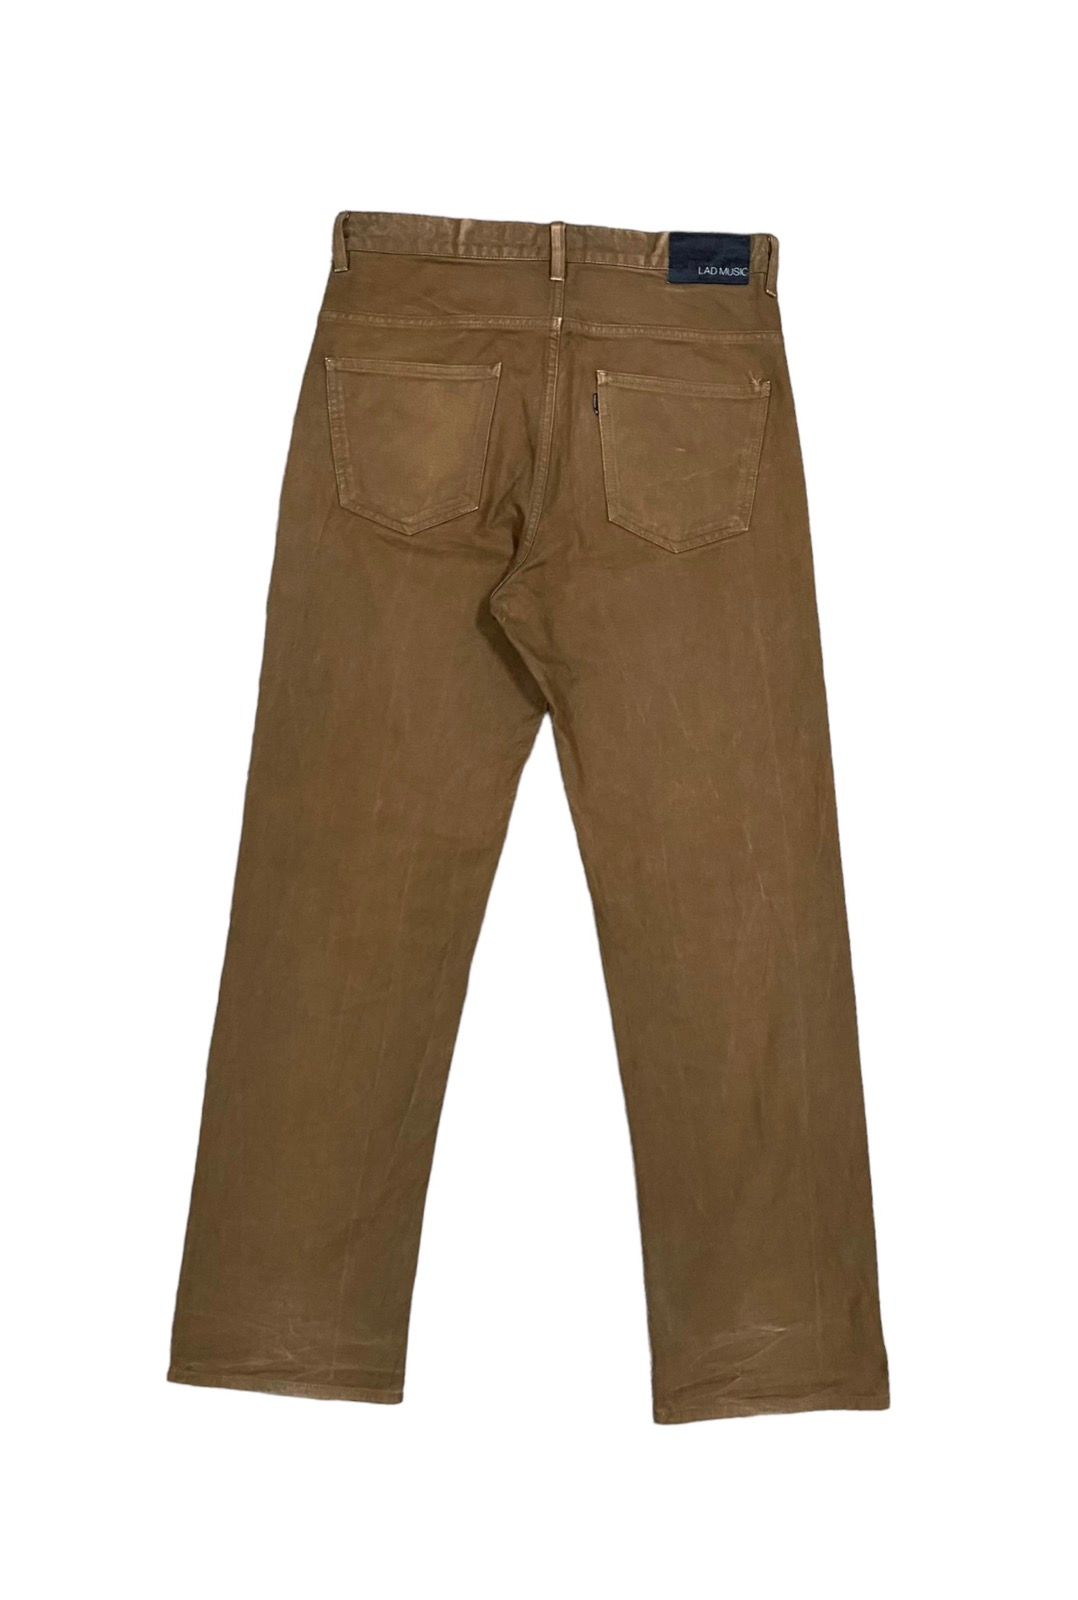 Lad Musician Brown Straight Cup Jeans Made In Japan - 3